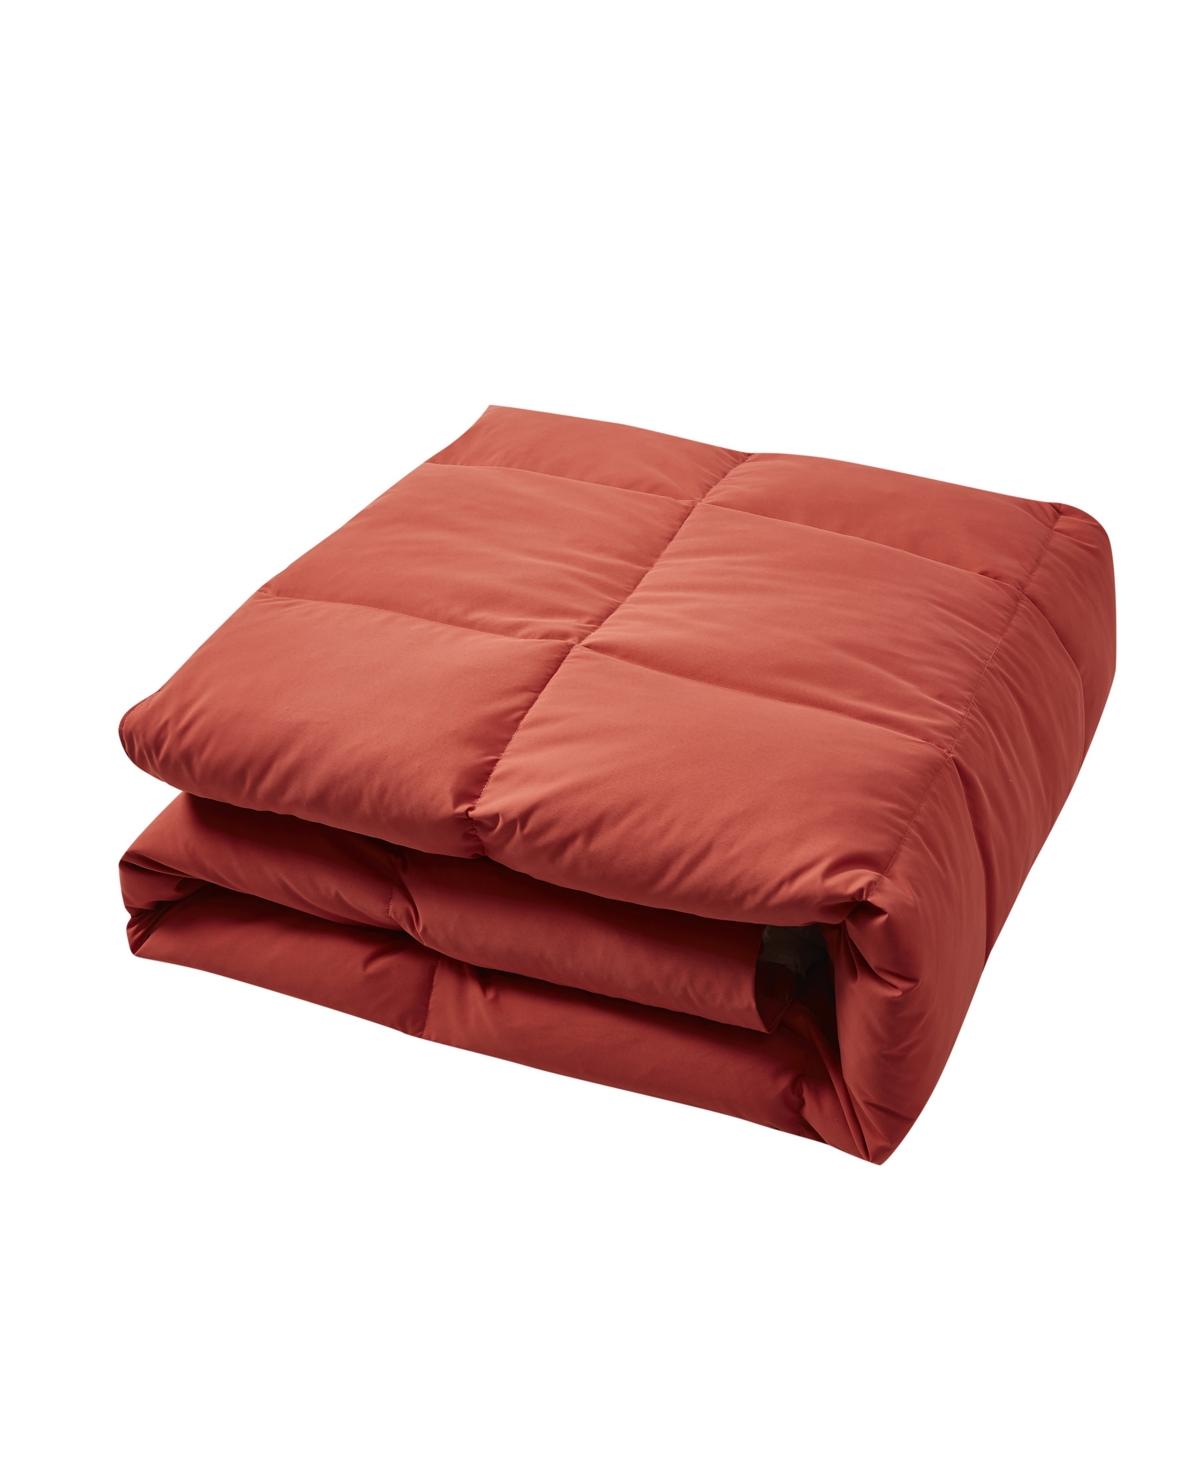 Beautyrest Microfiber Colored Feather & Down Comforter, King In Brick